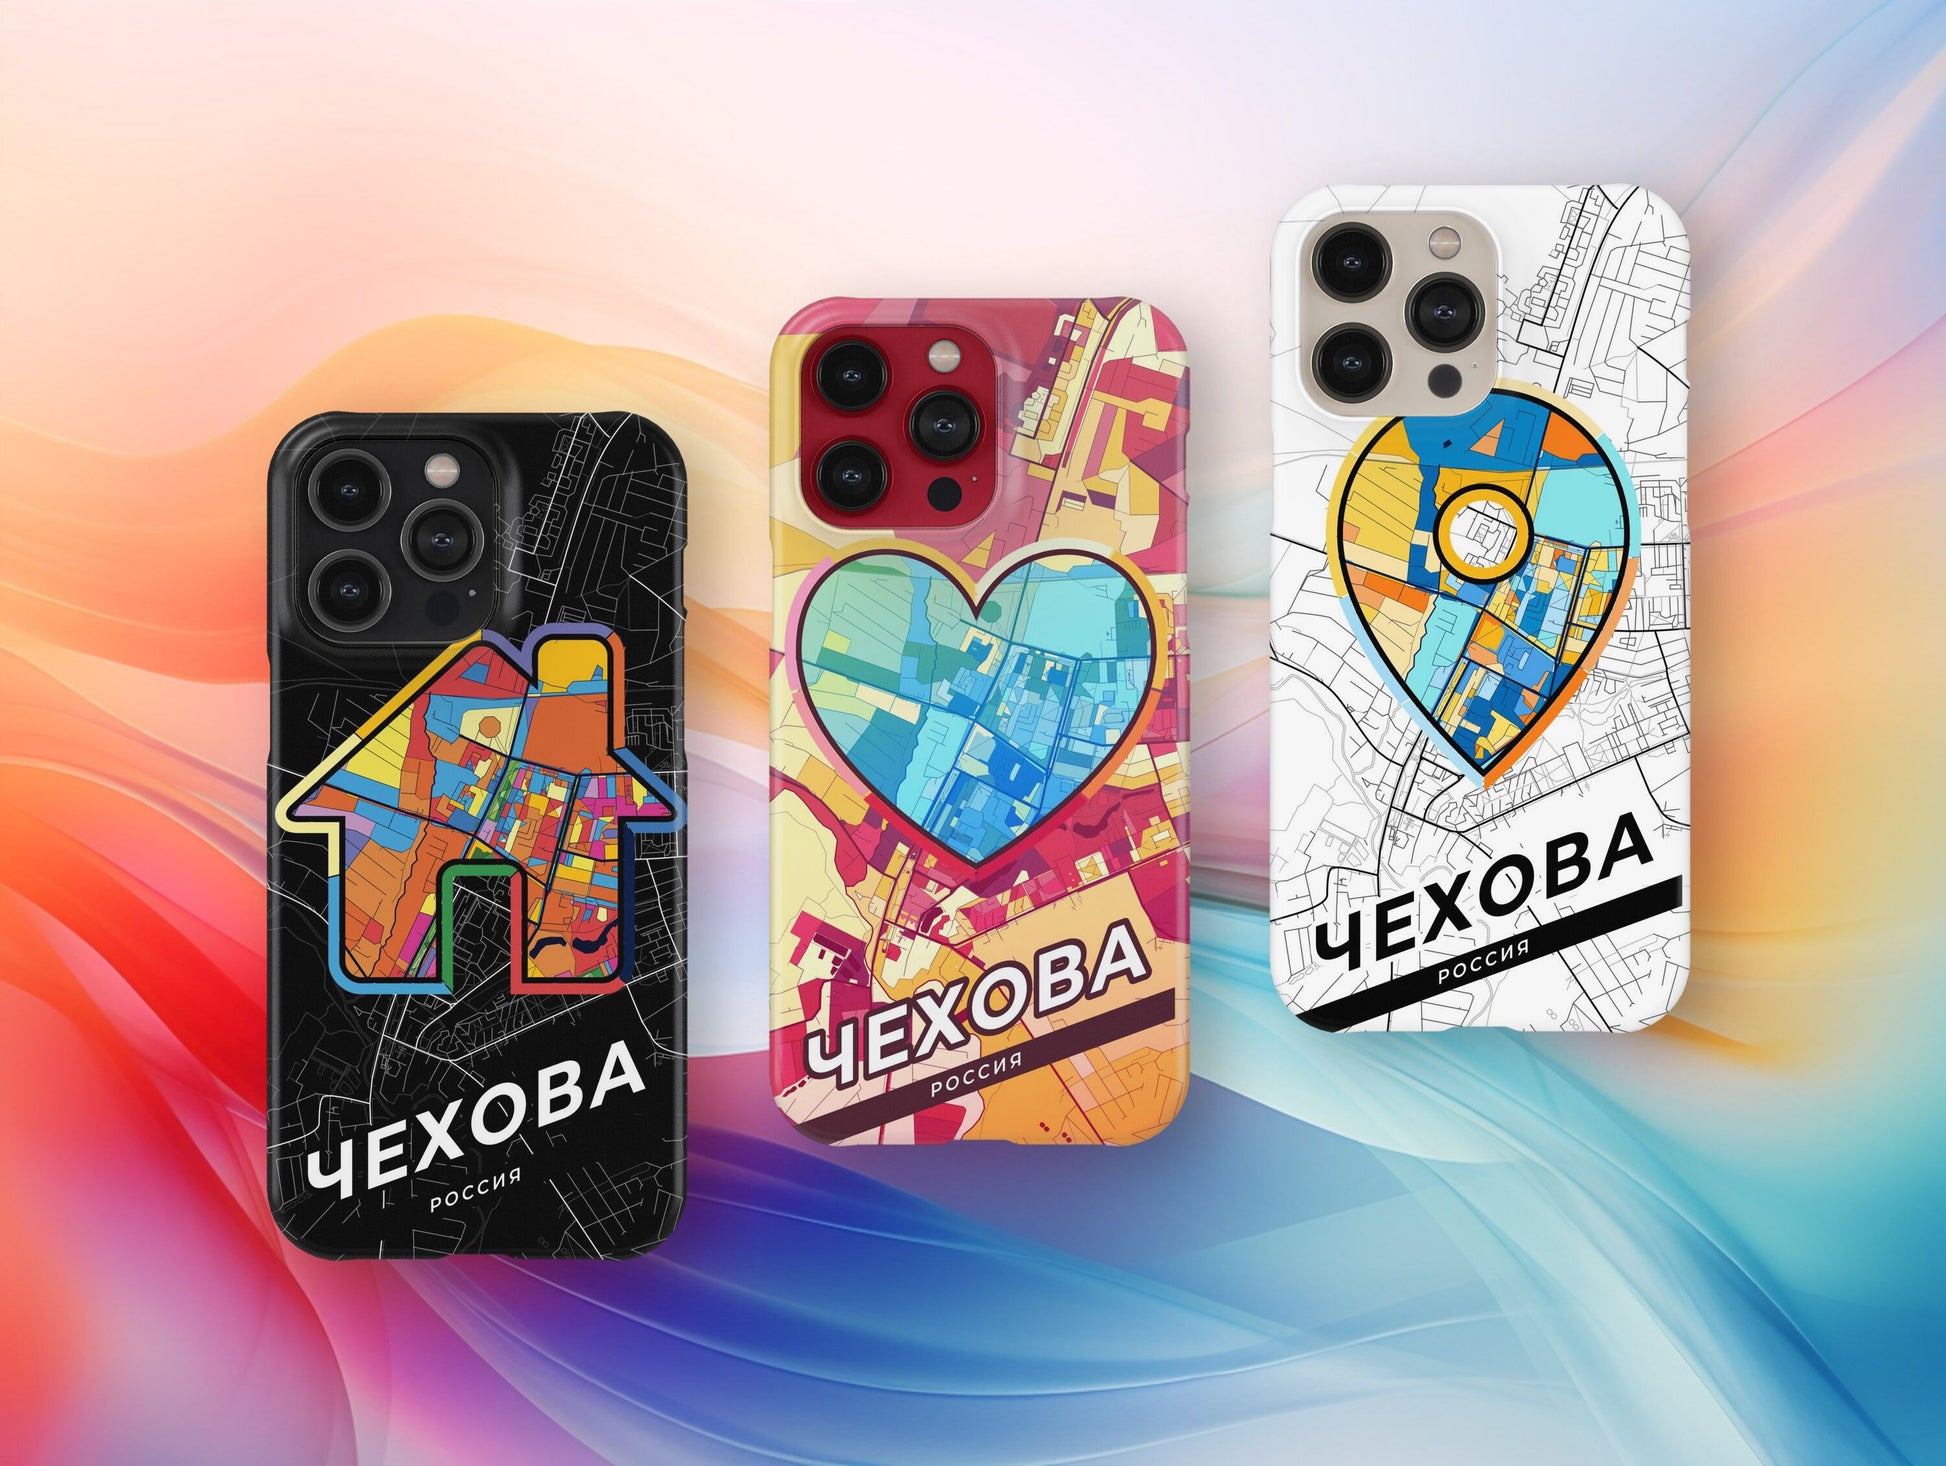 Chekhov Russia slim phone case with colorful icon. Birthday, wedding or housewarming gift. Couple match cases.